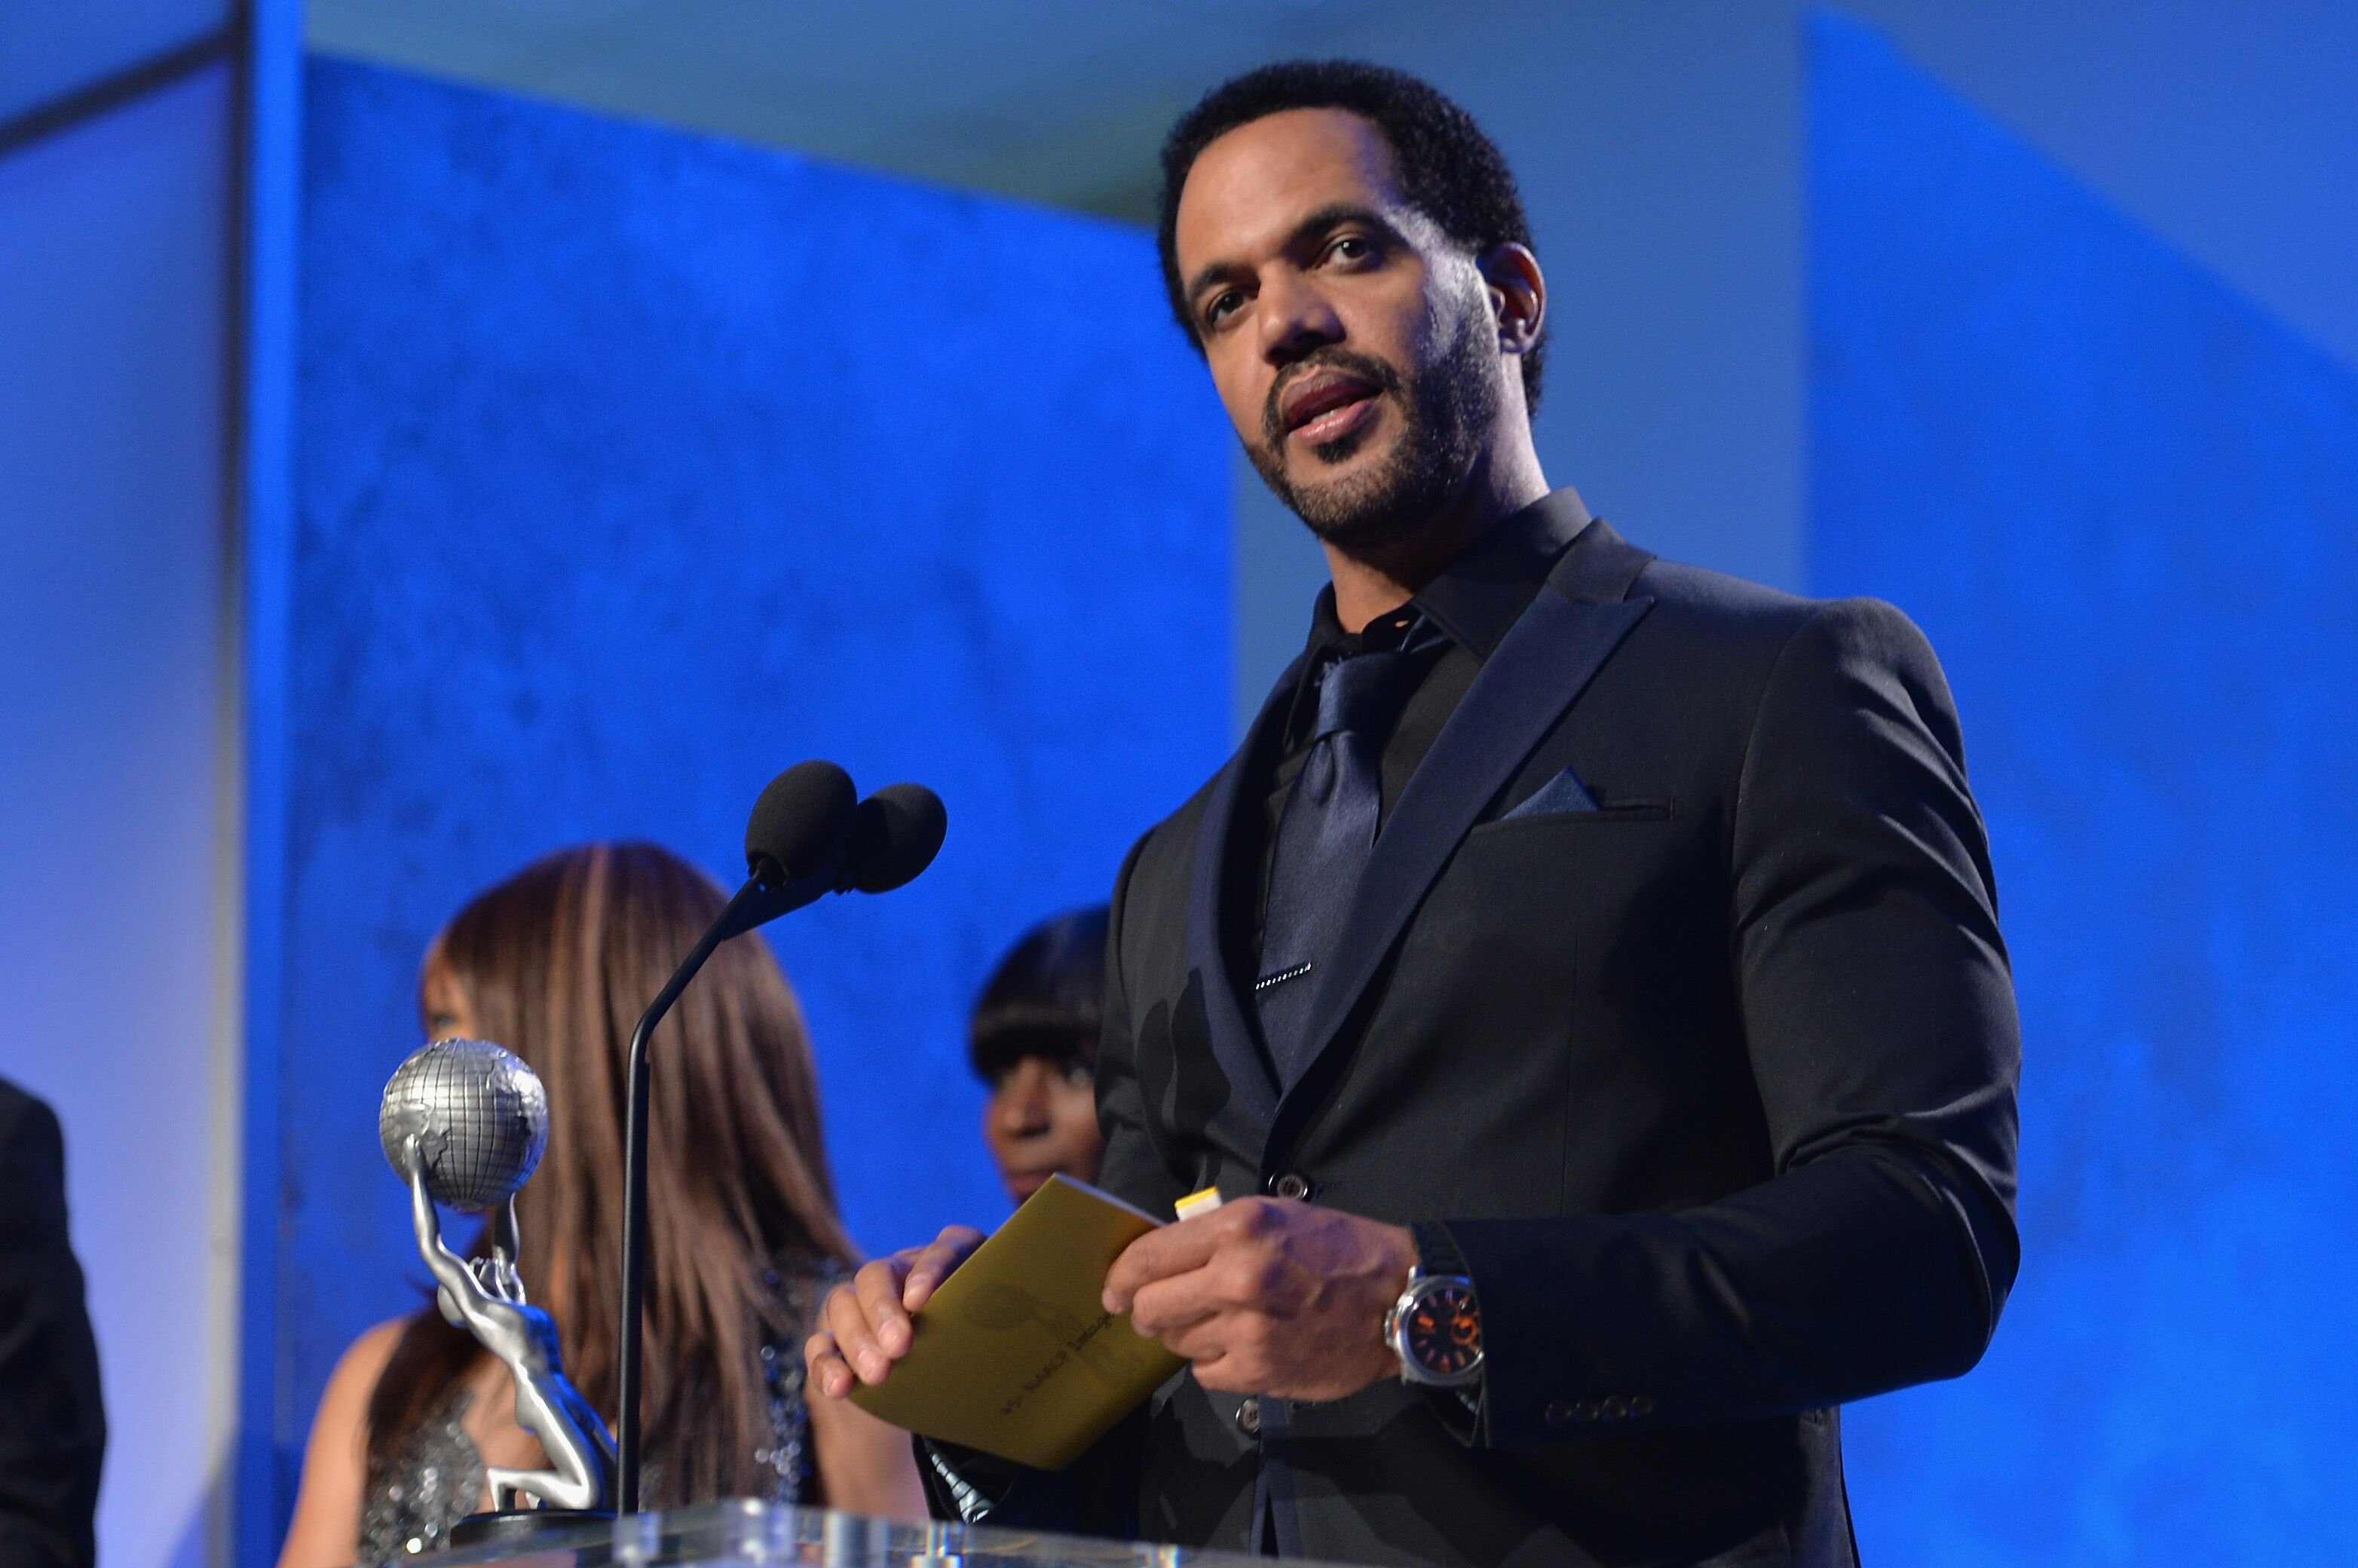 Kristoff St. John at the 45th NAACP Awards Ceremony at the Pasadena Civic Auditorium/ Source: Getty Images